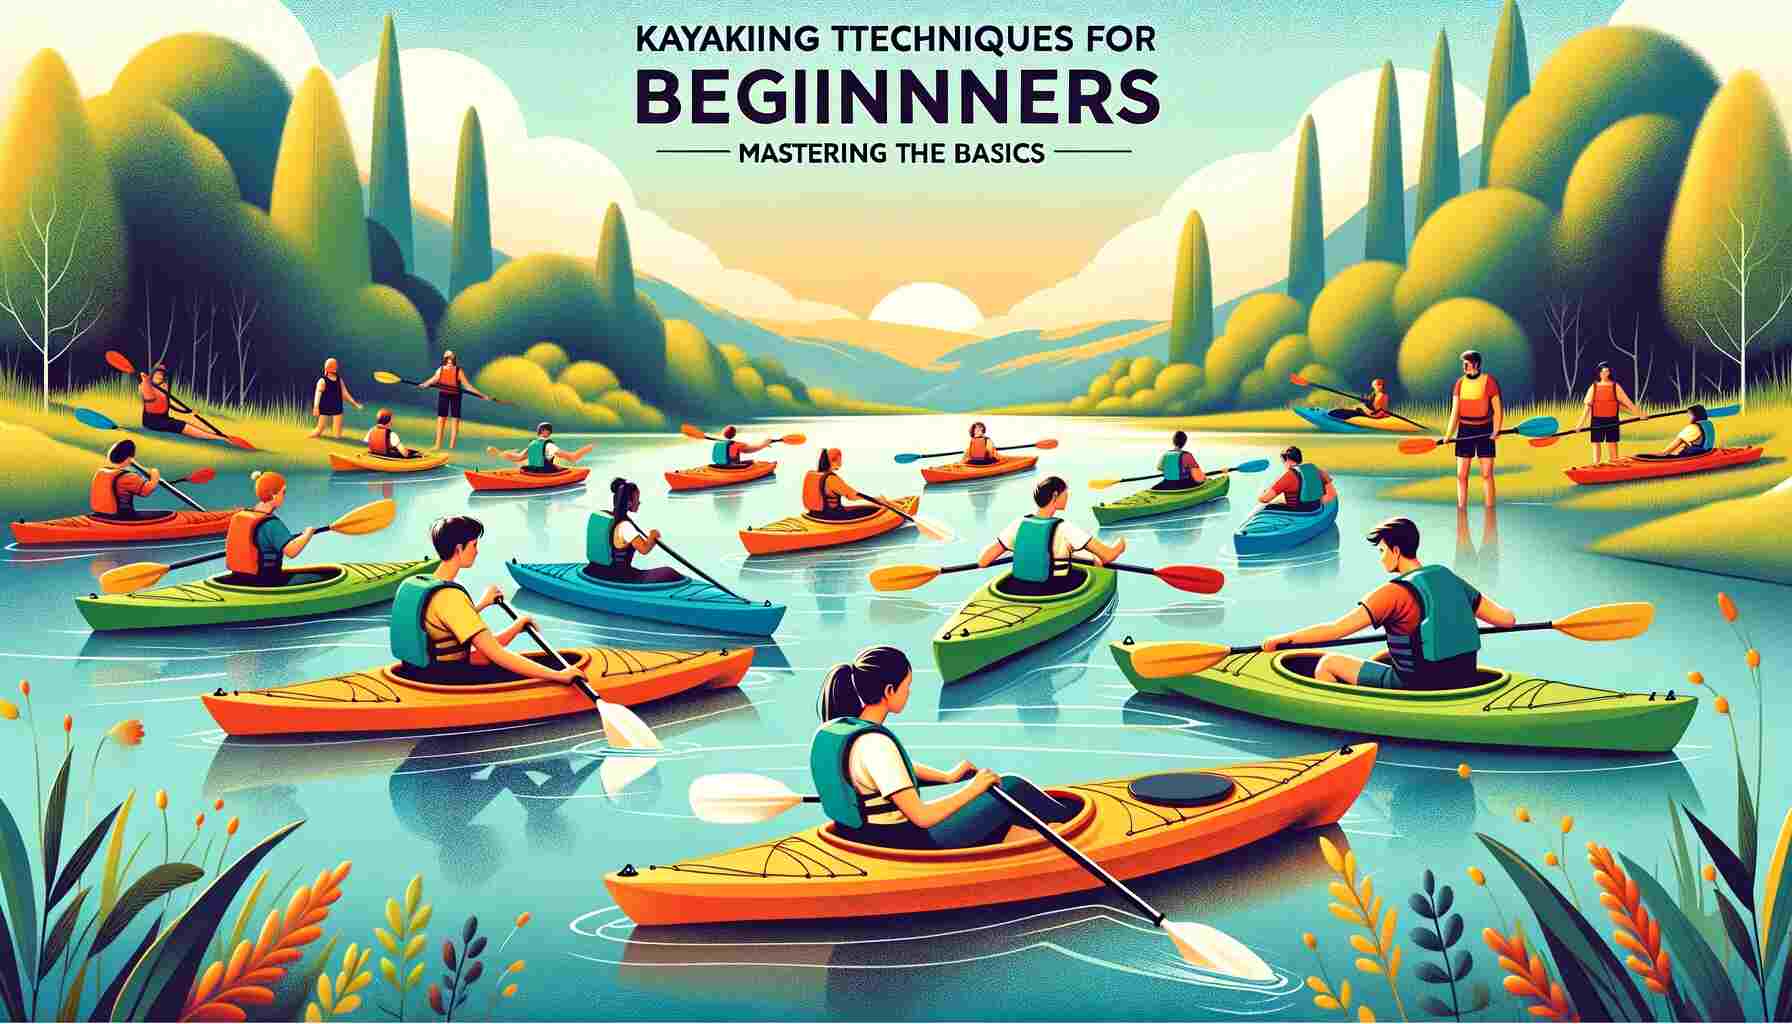 Beginner kayakers of various descents and genders learn techniques on a serene lake. Colorful kayaks dot the calm water as instructors demonstrate paddling and safety. The surrounding nature is lush and green. 'Kayaking Techniques for Beginners: Mastering the Basics' is written at the top.